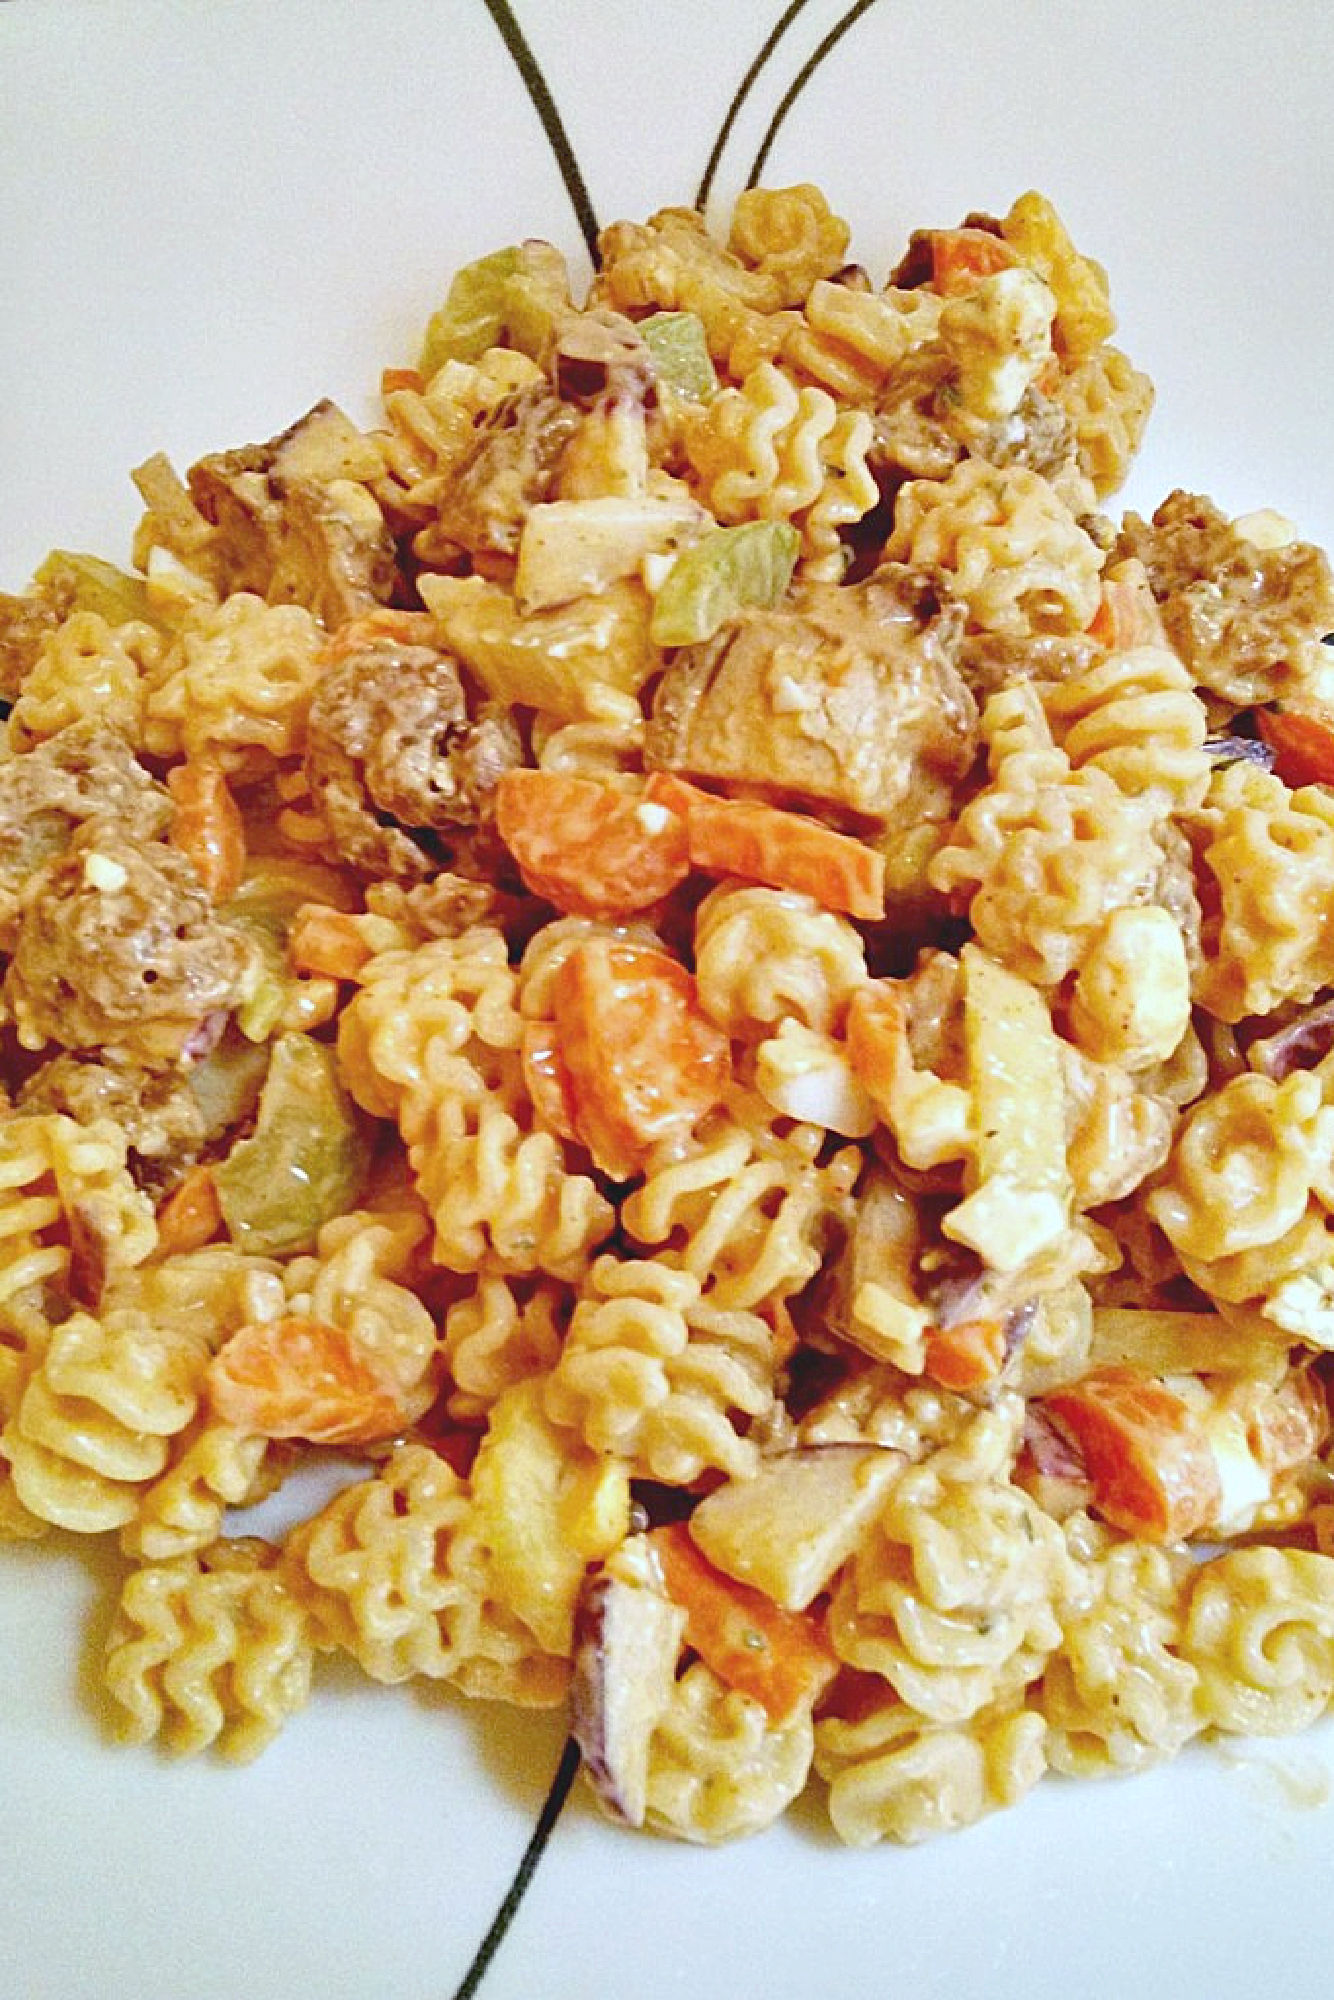 Buffalo Chicken Pasta Salad uses leftover buffalo chicken rotisserie chicken to make a deliciously quick and spicy weeknight dinner, but you could use any boneless and skinless chicken you have available.  #OurFamilyTable